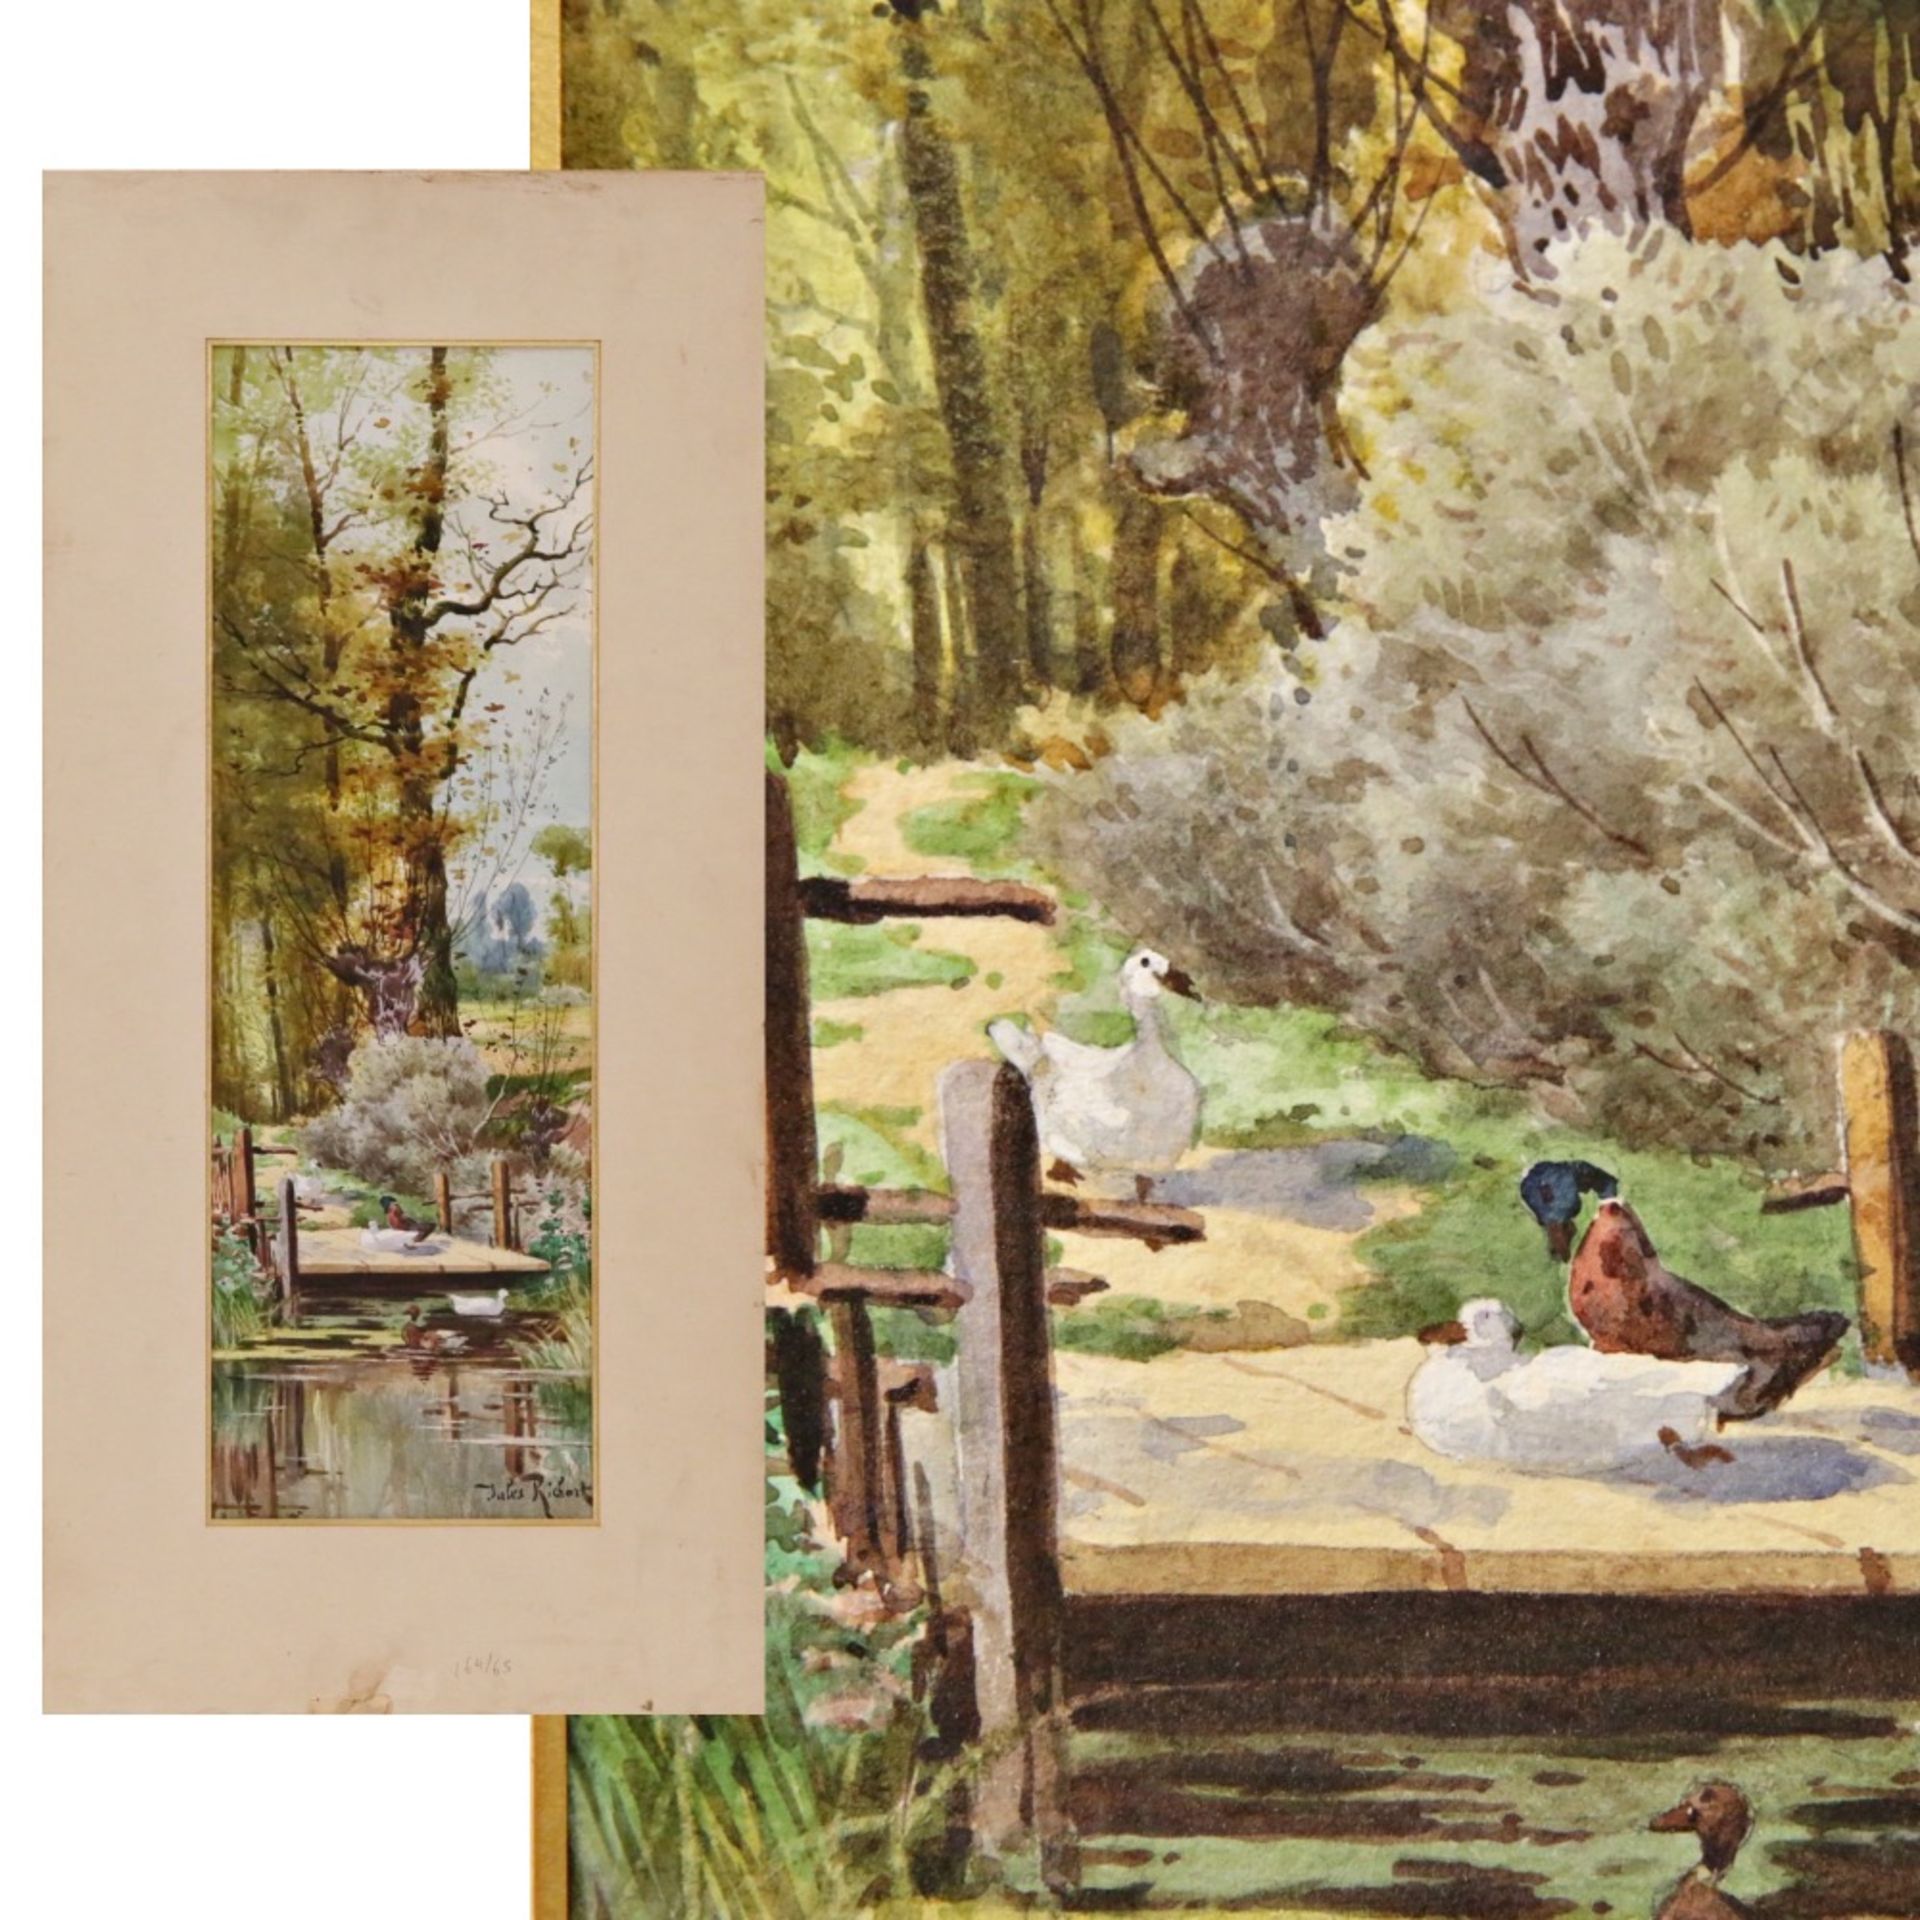 Jules RICHARD (XIX-XX) "A duck pontoon", watercolor on paper, French painting of the 19th-20th centu